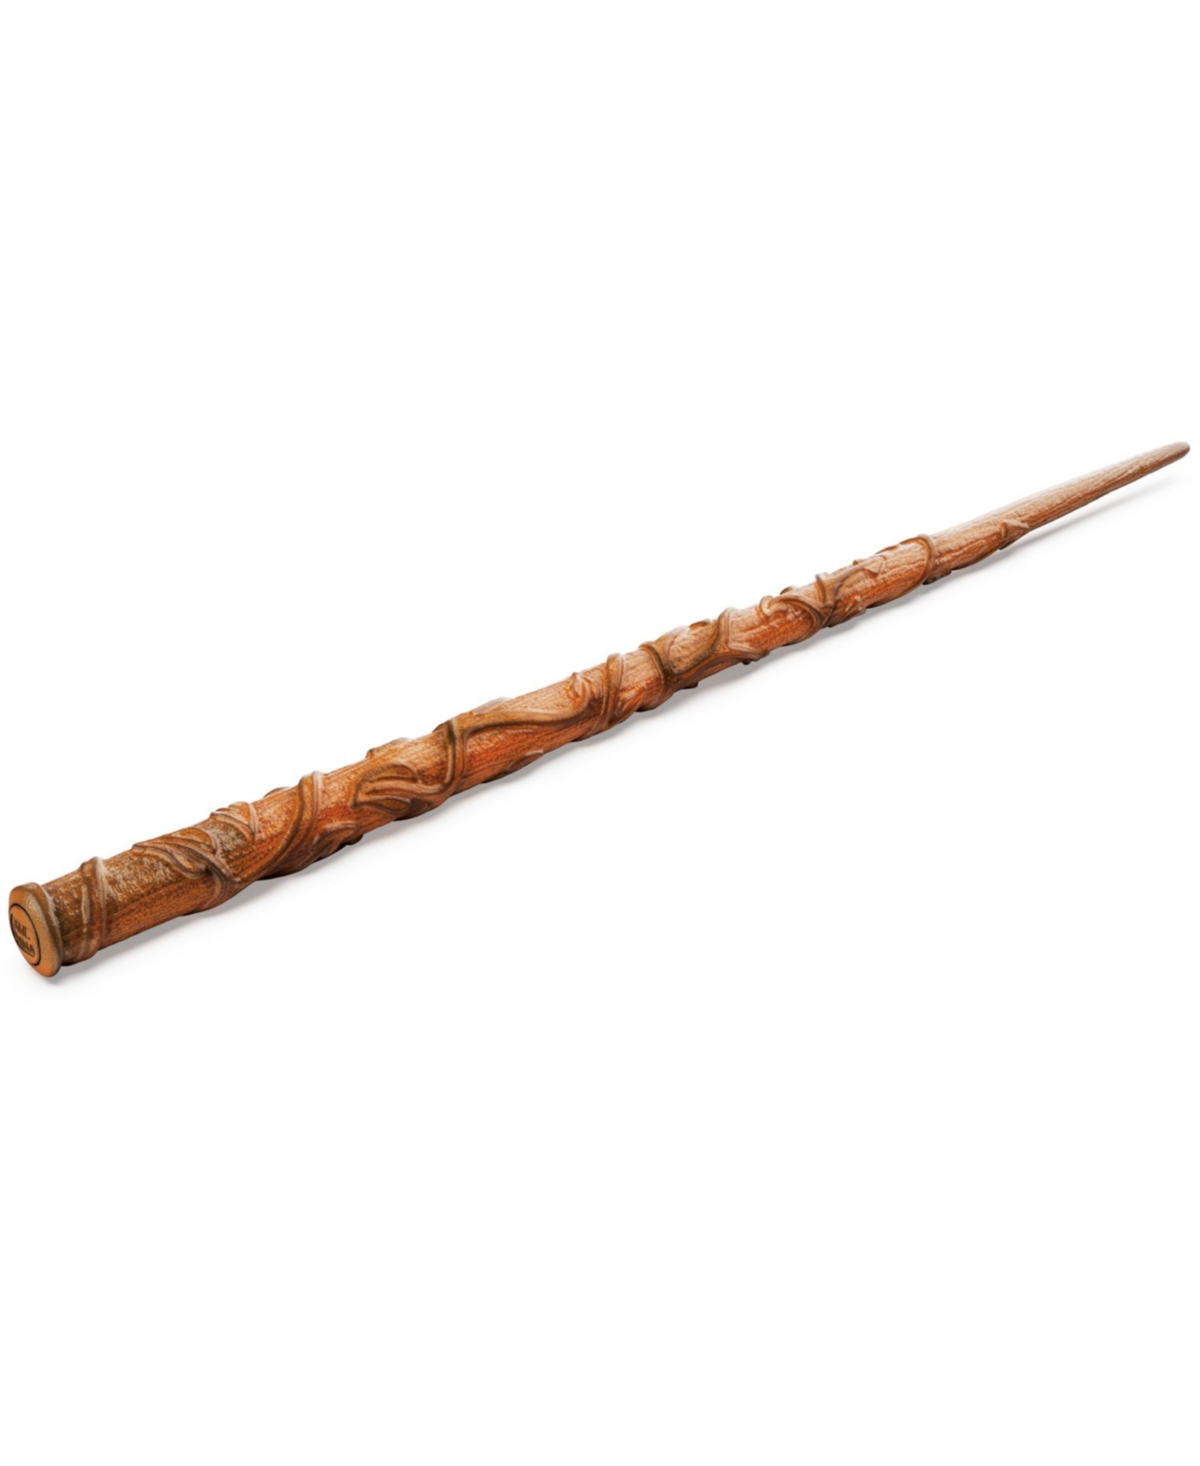 Wizarding World Spellbinding Wand Hermione In No Color